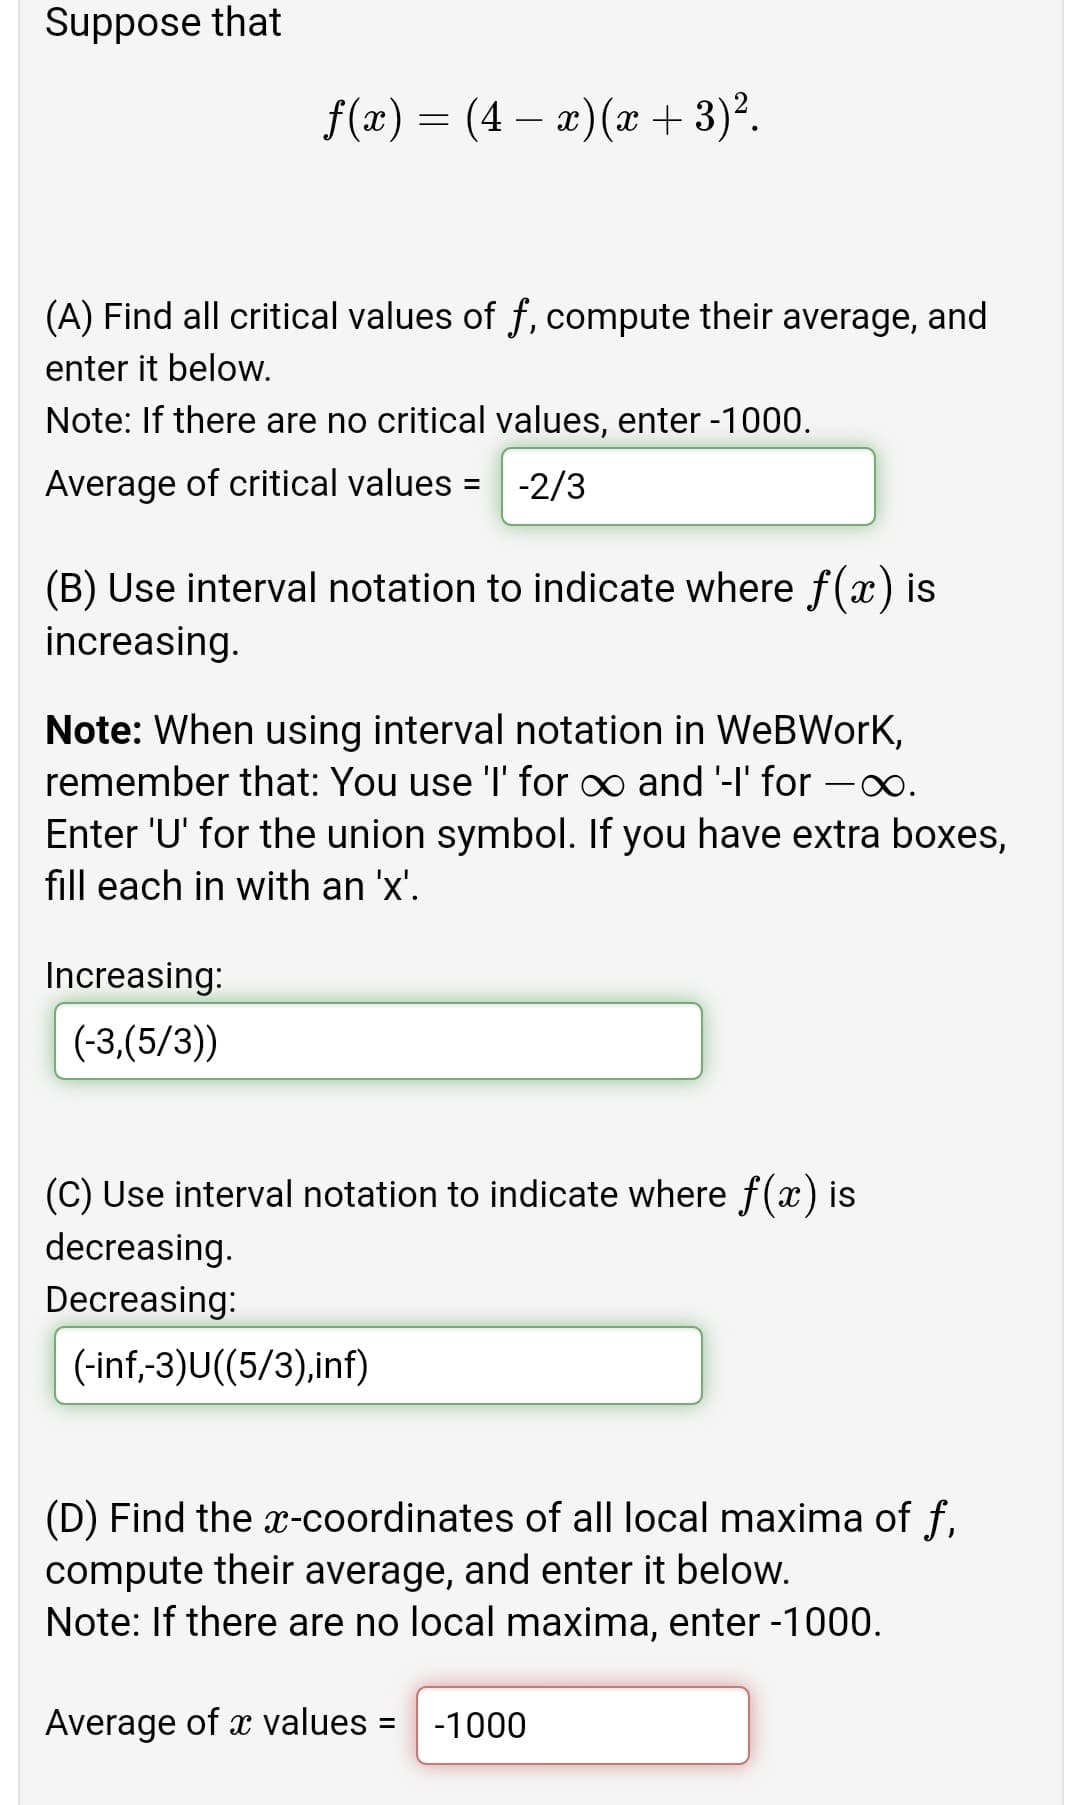 Suppose that
f(x) = (4 – æ)(x + 3)°.
(A) Find all critical values of f, compute their average, and
enter it below.
Note: If there are no critical values, enter -1000.
Average of critical values =
-2/3
(B) Use interval notation to indicate where f(x) is
increasing.
Note: When using interval notation in WeBWorKk,
remember that: You use 'l' for o and '-I' for
Enter 'U' for the union symbol. If you have extra boxes,
fill each in with an 'x'.
Increasing:
(-3,(5/3))
(C) Use interval notation to indicate where f(x) is
decreasing.
Decreasing:
(-inf,-3)U((5/3),inf)
(D) Find the x-coordinates of all local maxima of f,
compute their average, and enter it below.
Note: If there are no local maxima, enter -1000.
Average of x values =
-1000
